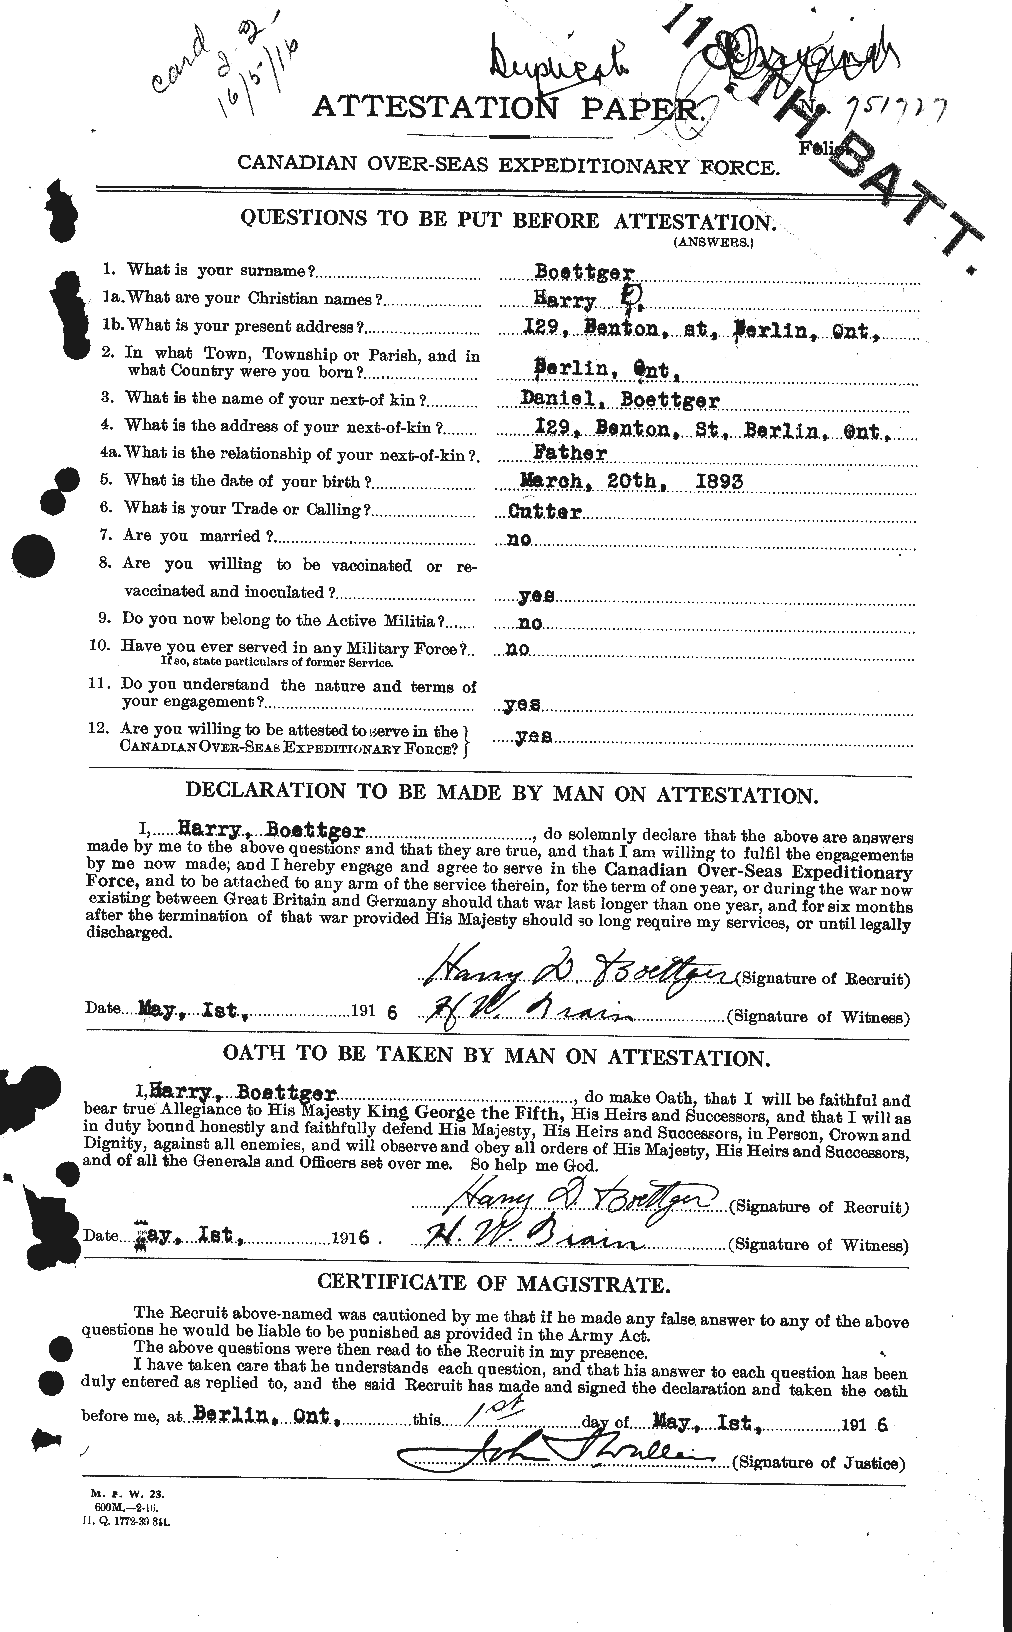 Personnel Records of the First World War - CEF 249137a